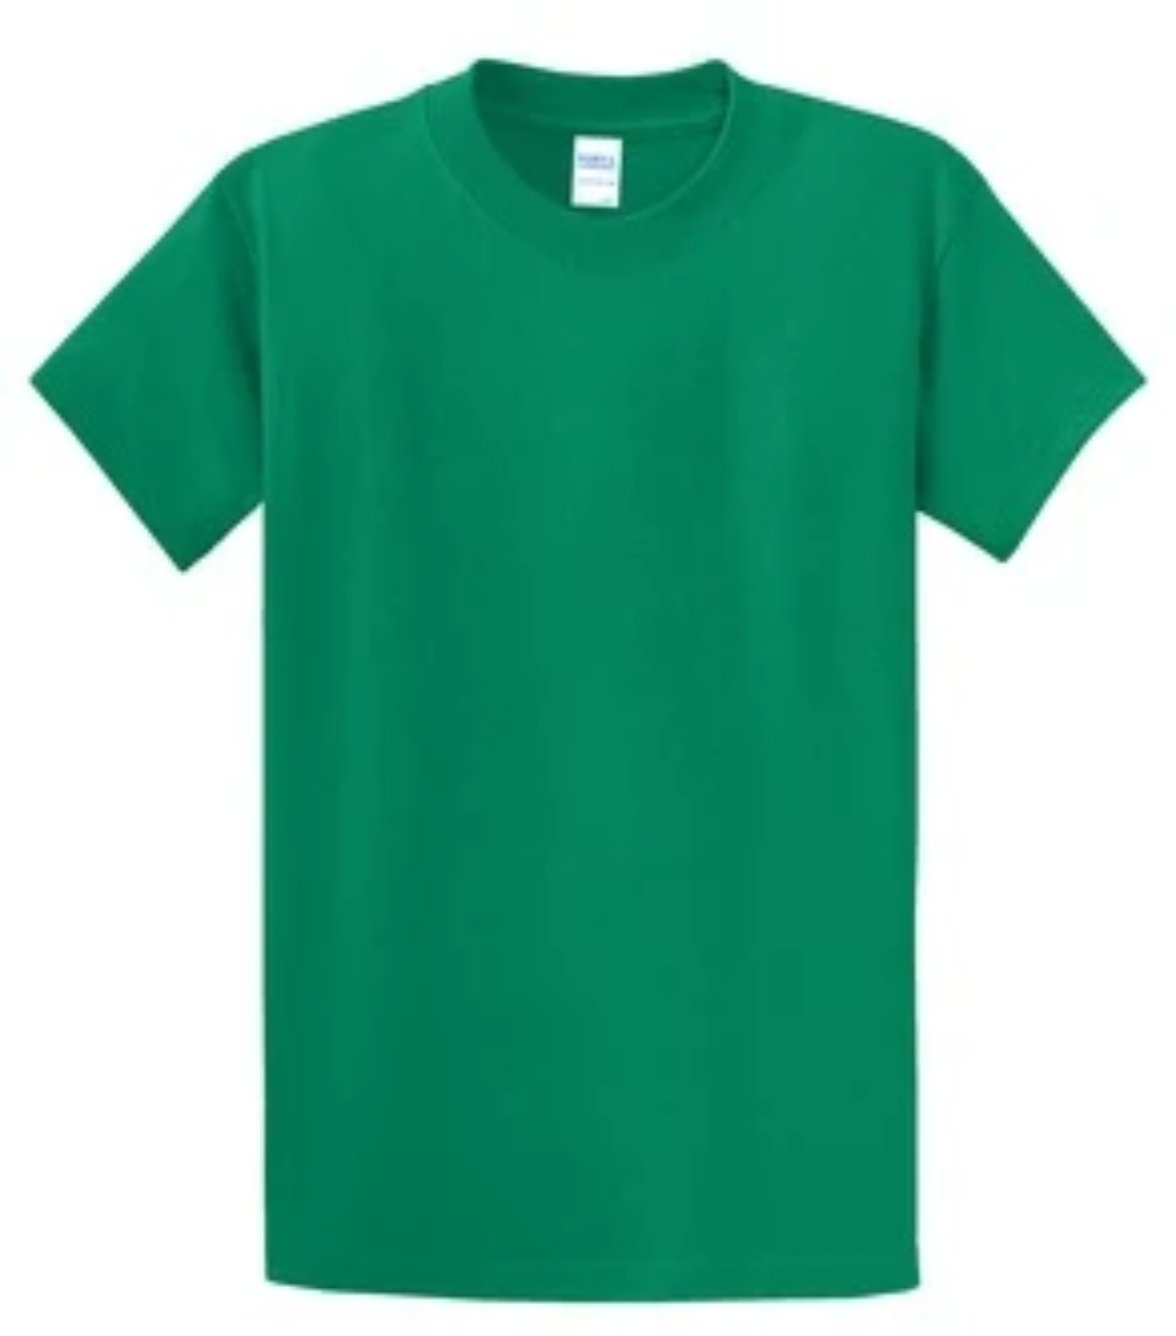 Port & Company 100% Cotton Essential T-Shirt Kelly Green Tall PC61T